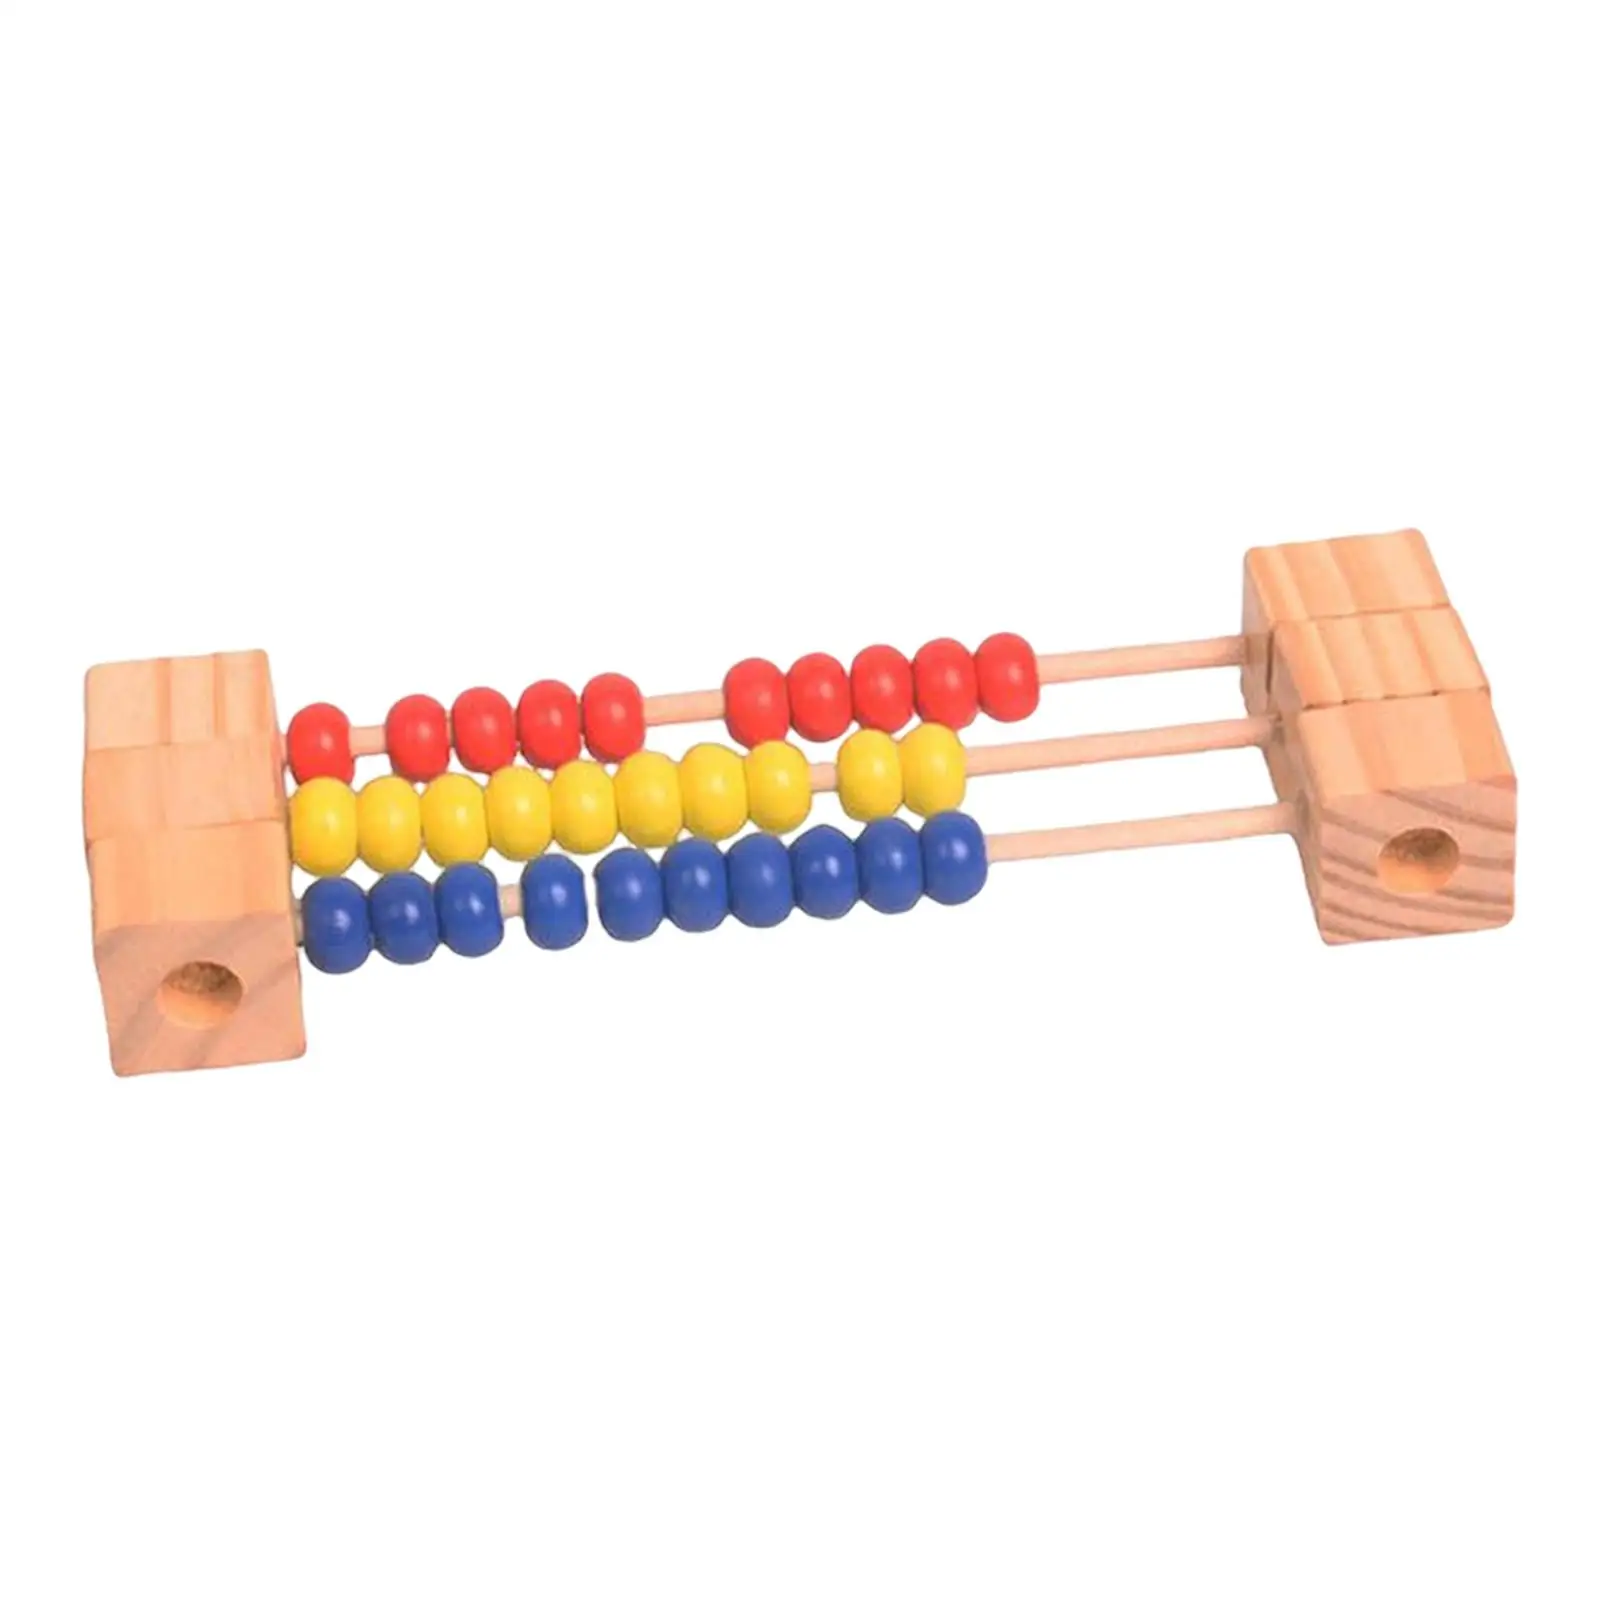 Montessori Wooden Abacus Math Learning Abacus Learning Educational Toy Calculating Beads Counting Game for Boys Children Gifts